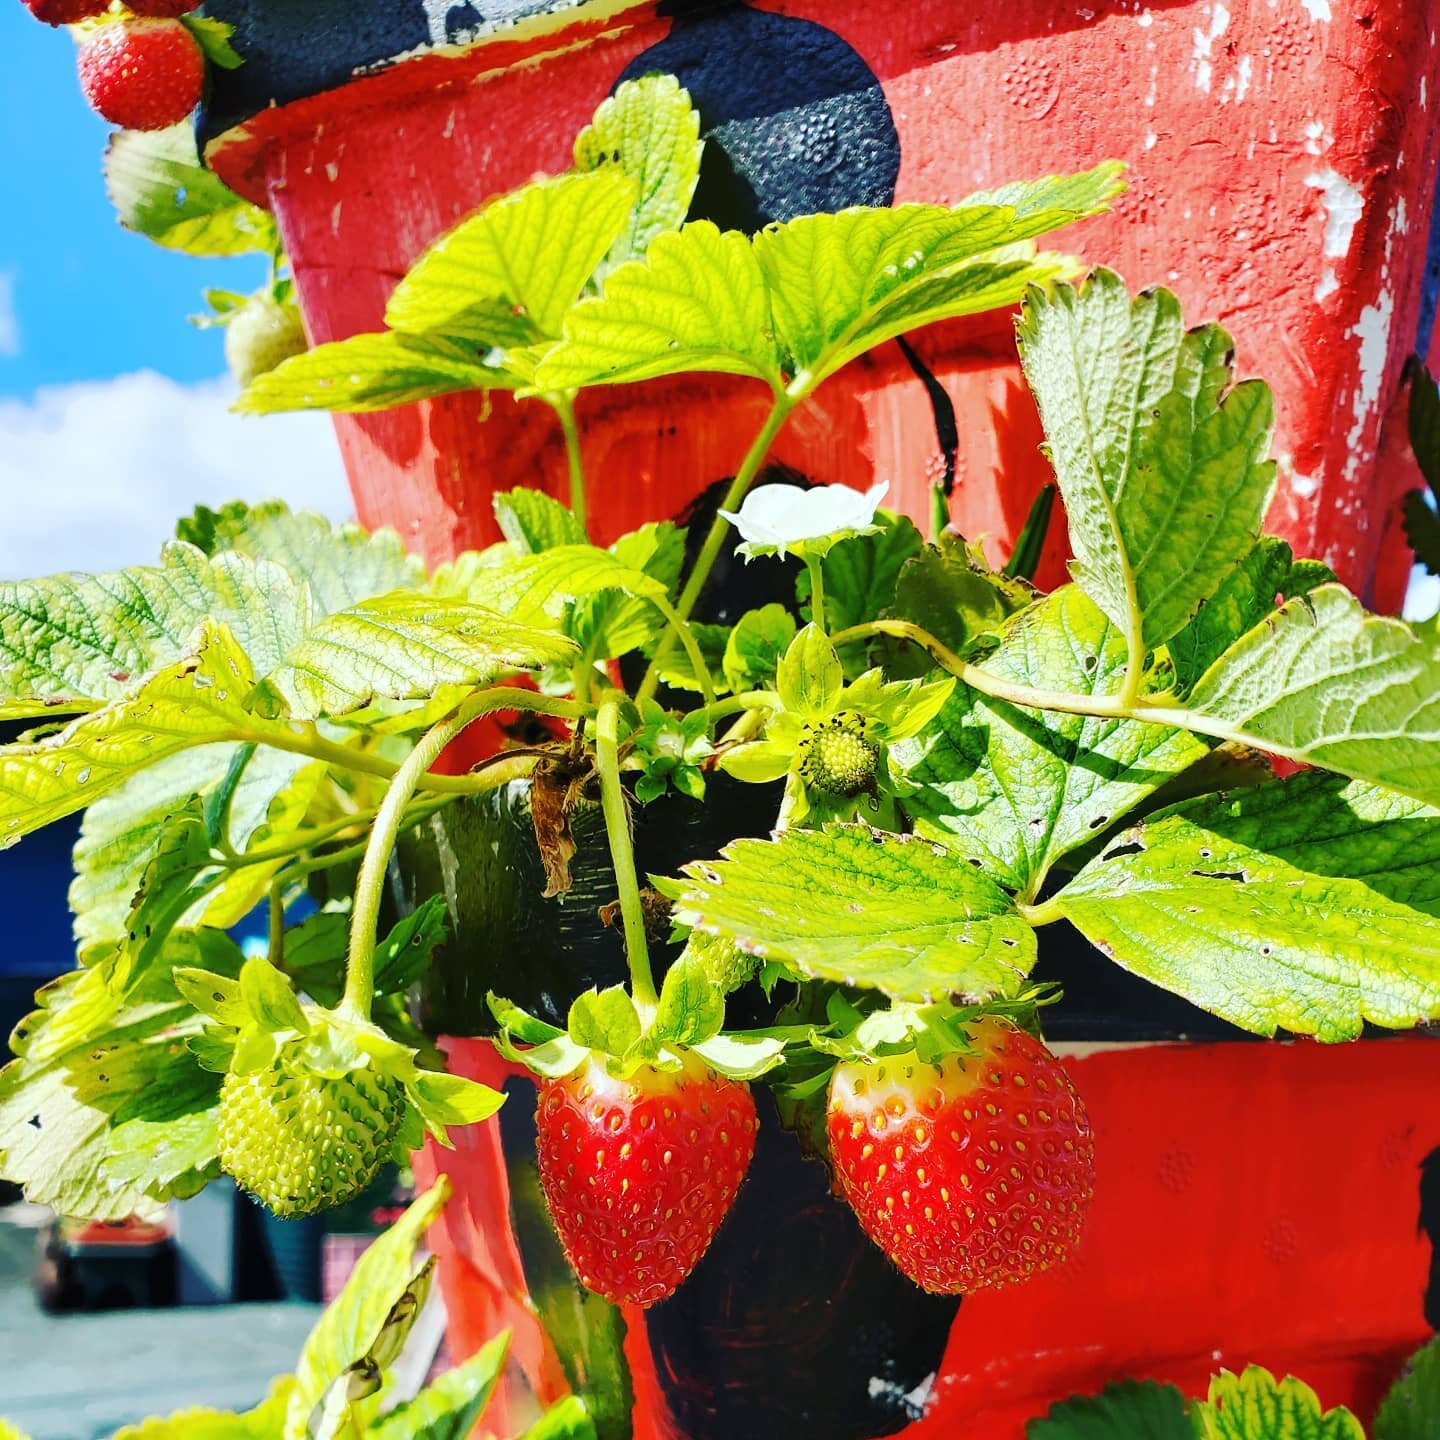 As all of the summer crops start to wind down, the strawberries are just  starting to pick up again! Don't you just love fruit that disobeys the seasons 🍓🍓🍓